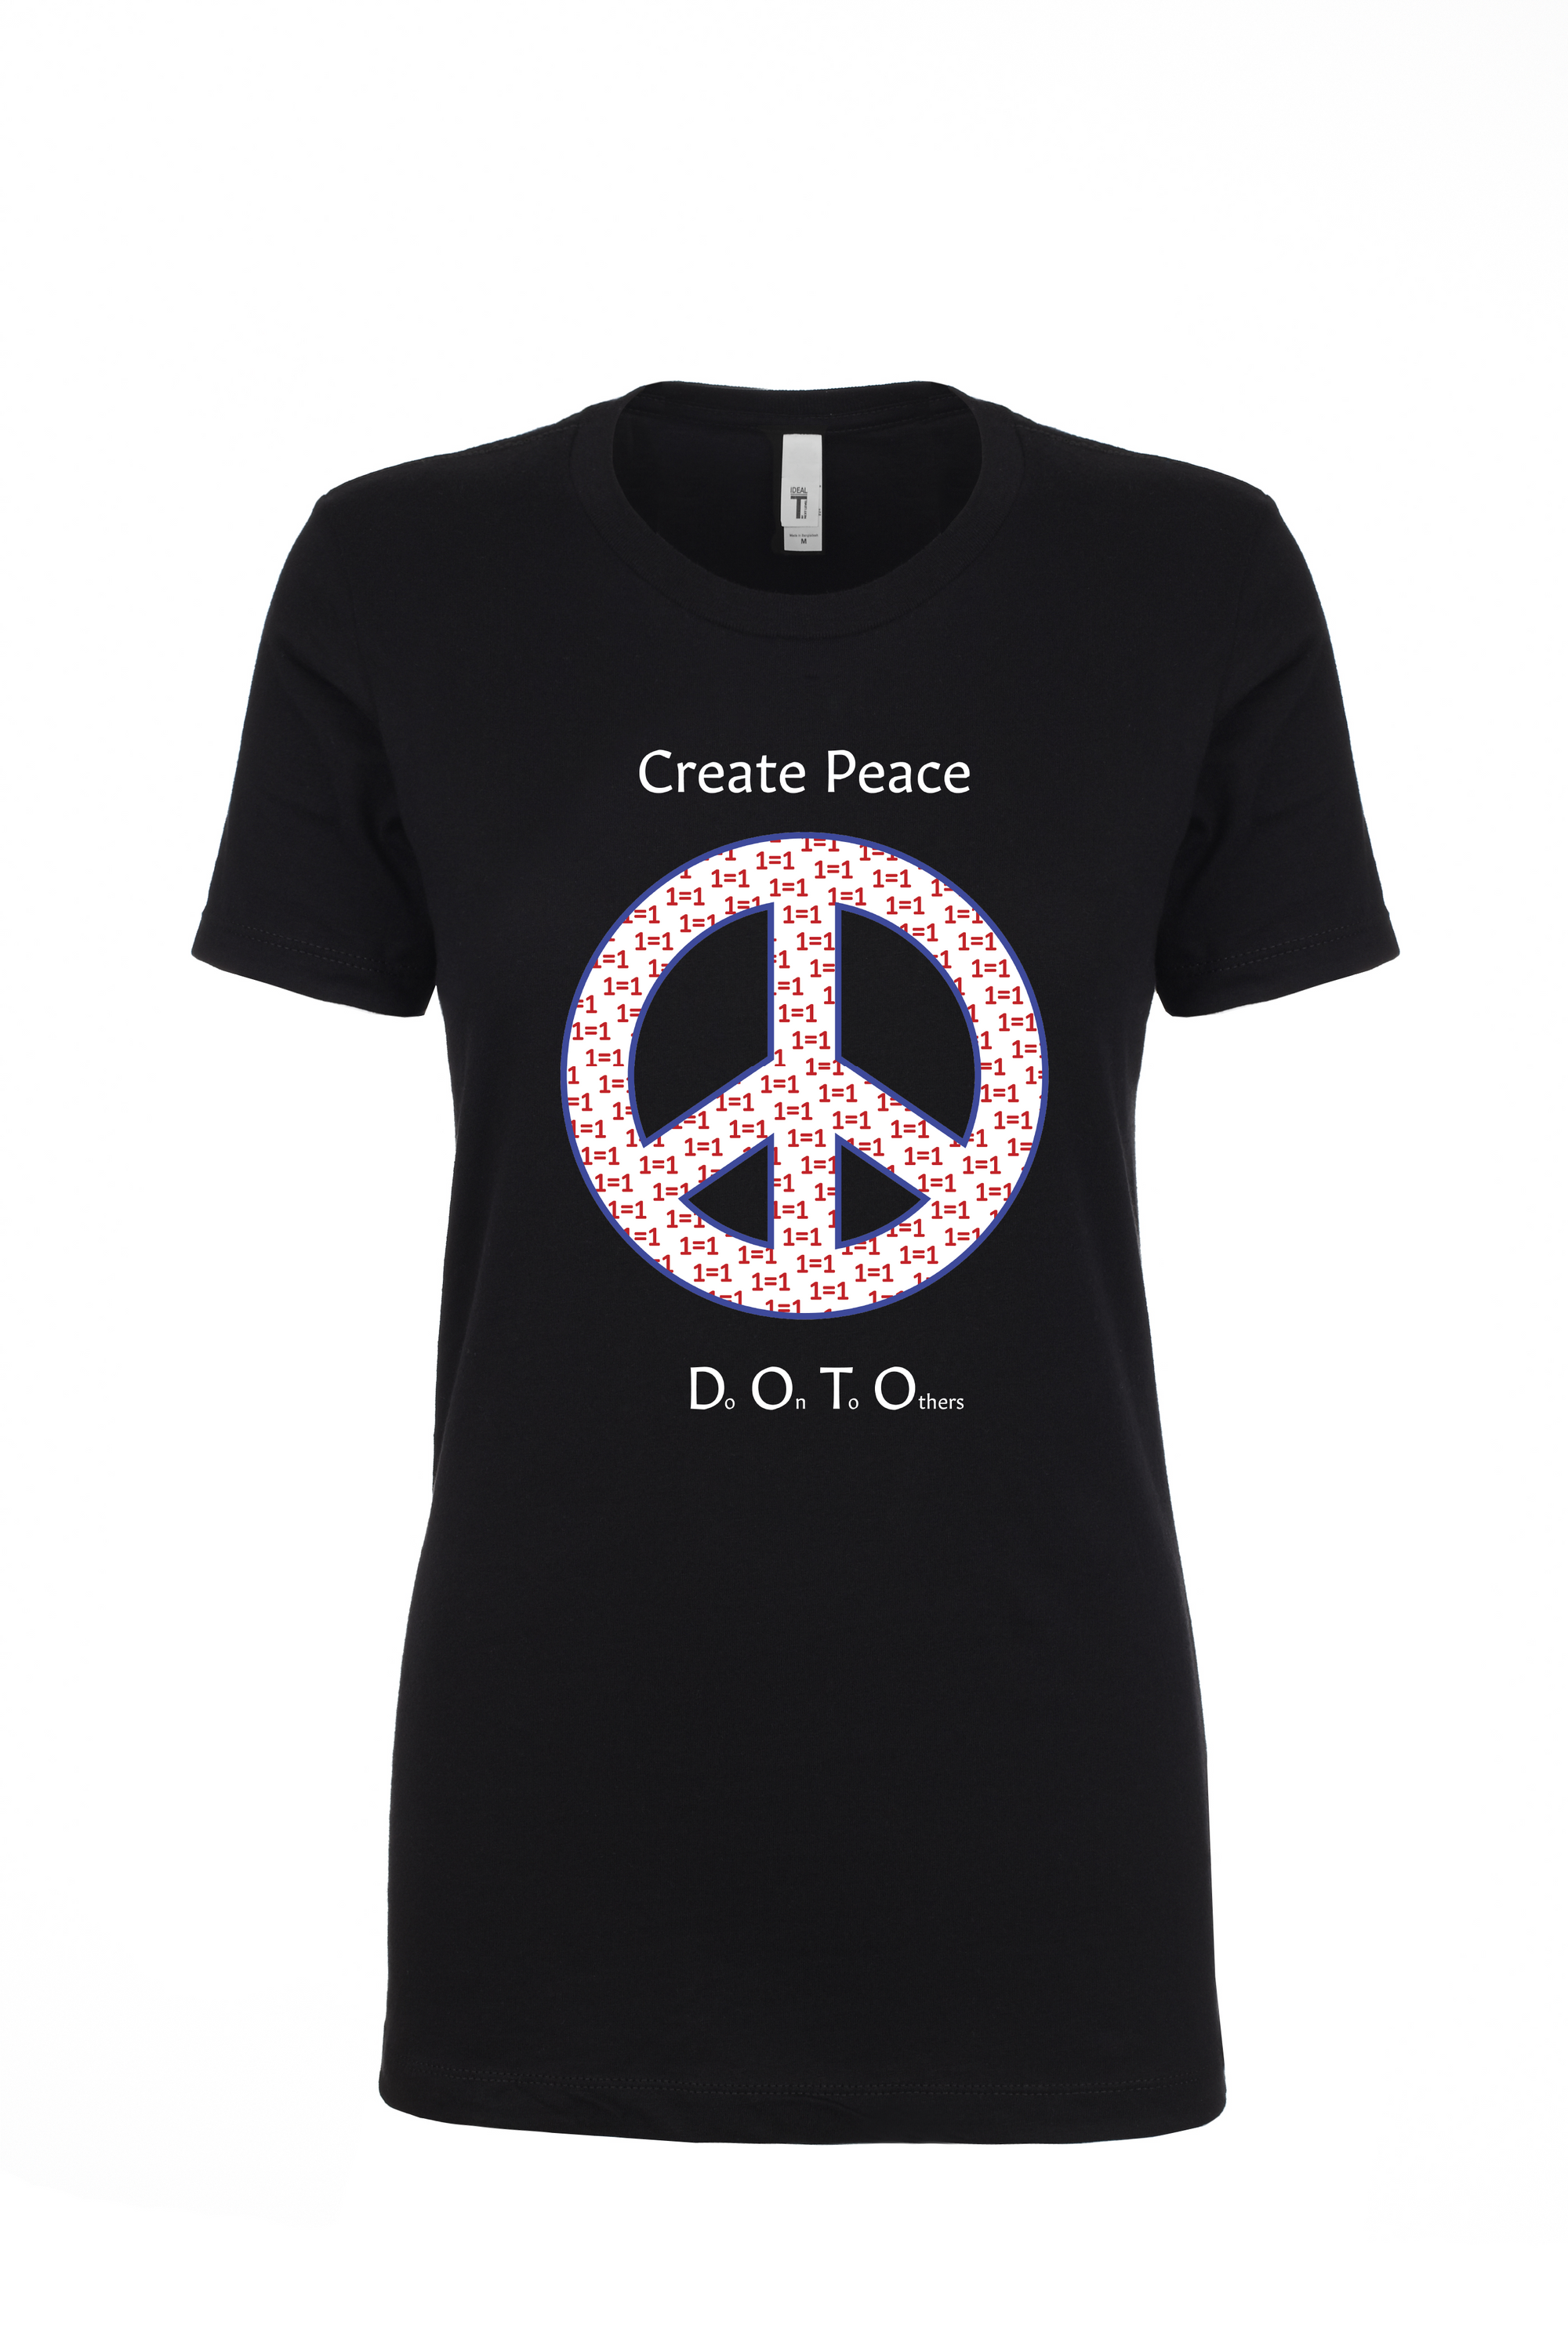 Woman's Perfect Tee - CREATE PEACE - Red 1